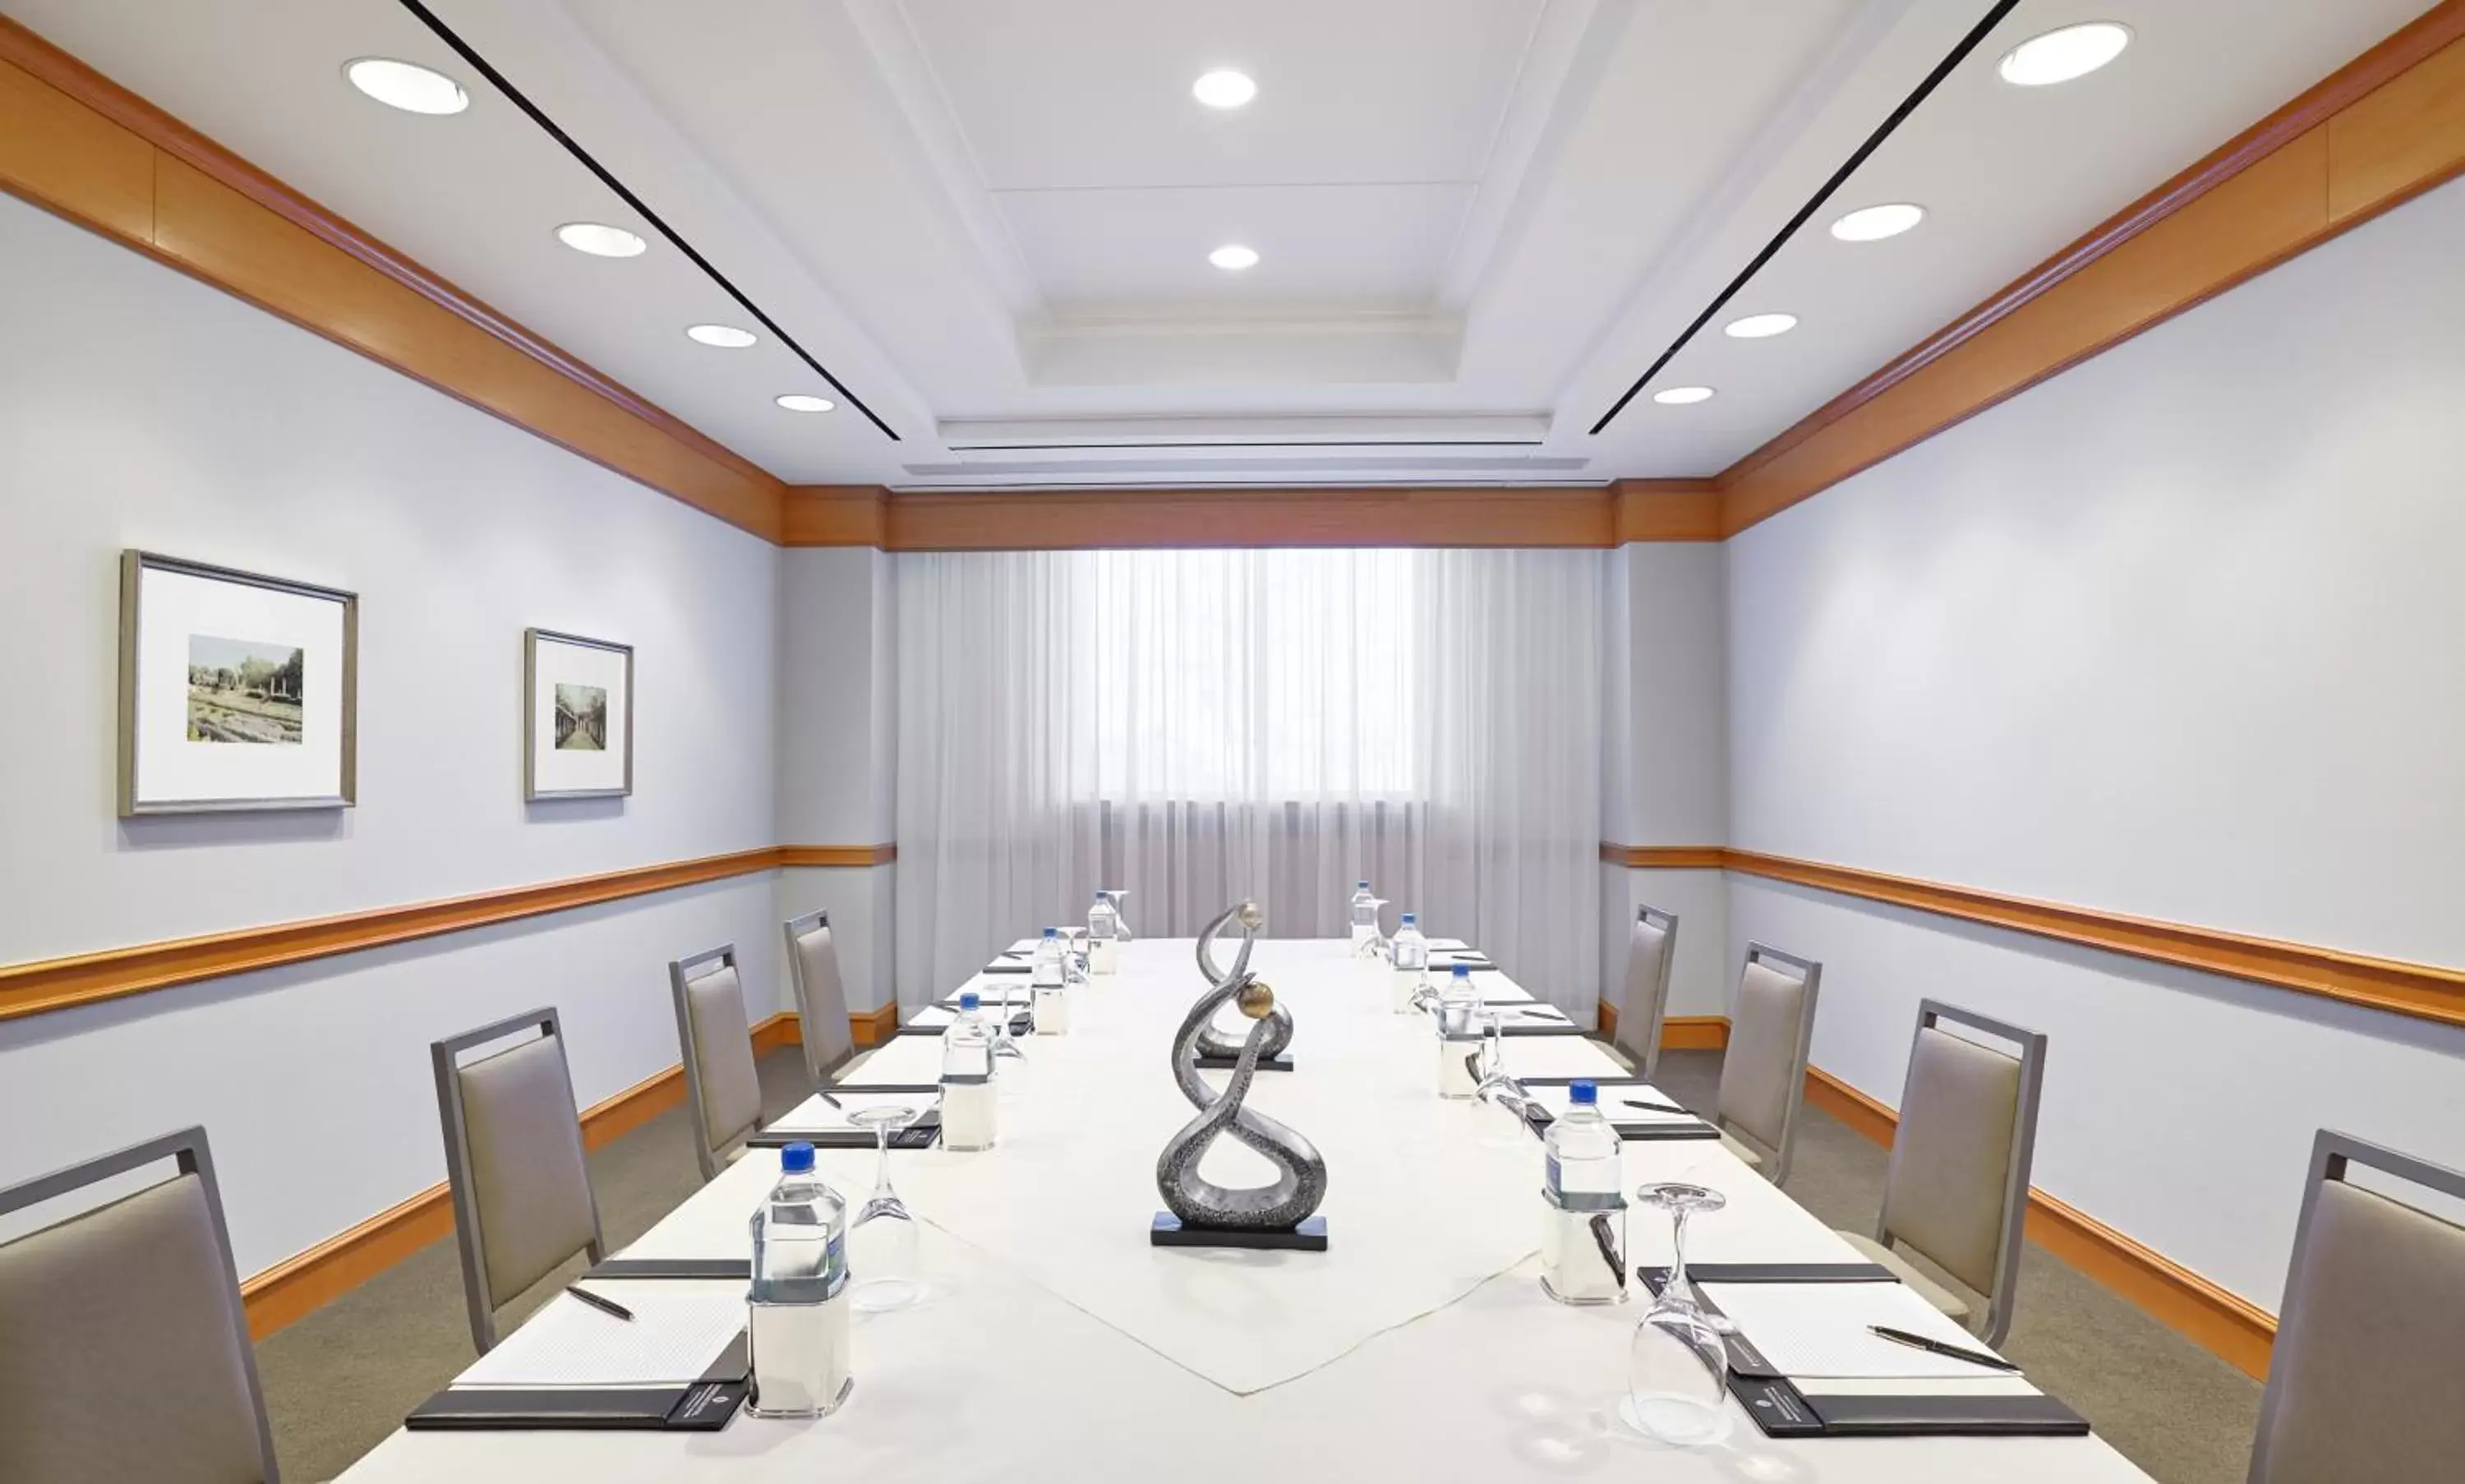 Meeting/conference room in InterContinental Cleveland, an IHG Hotel